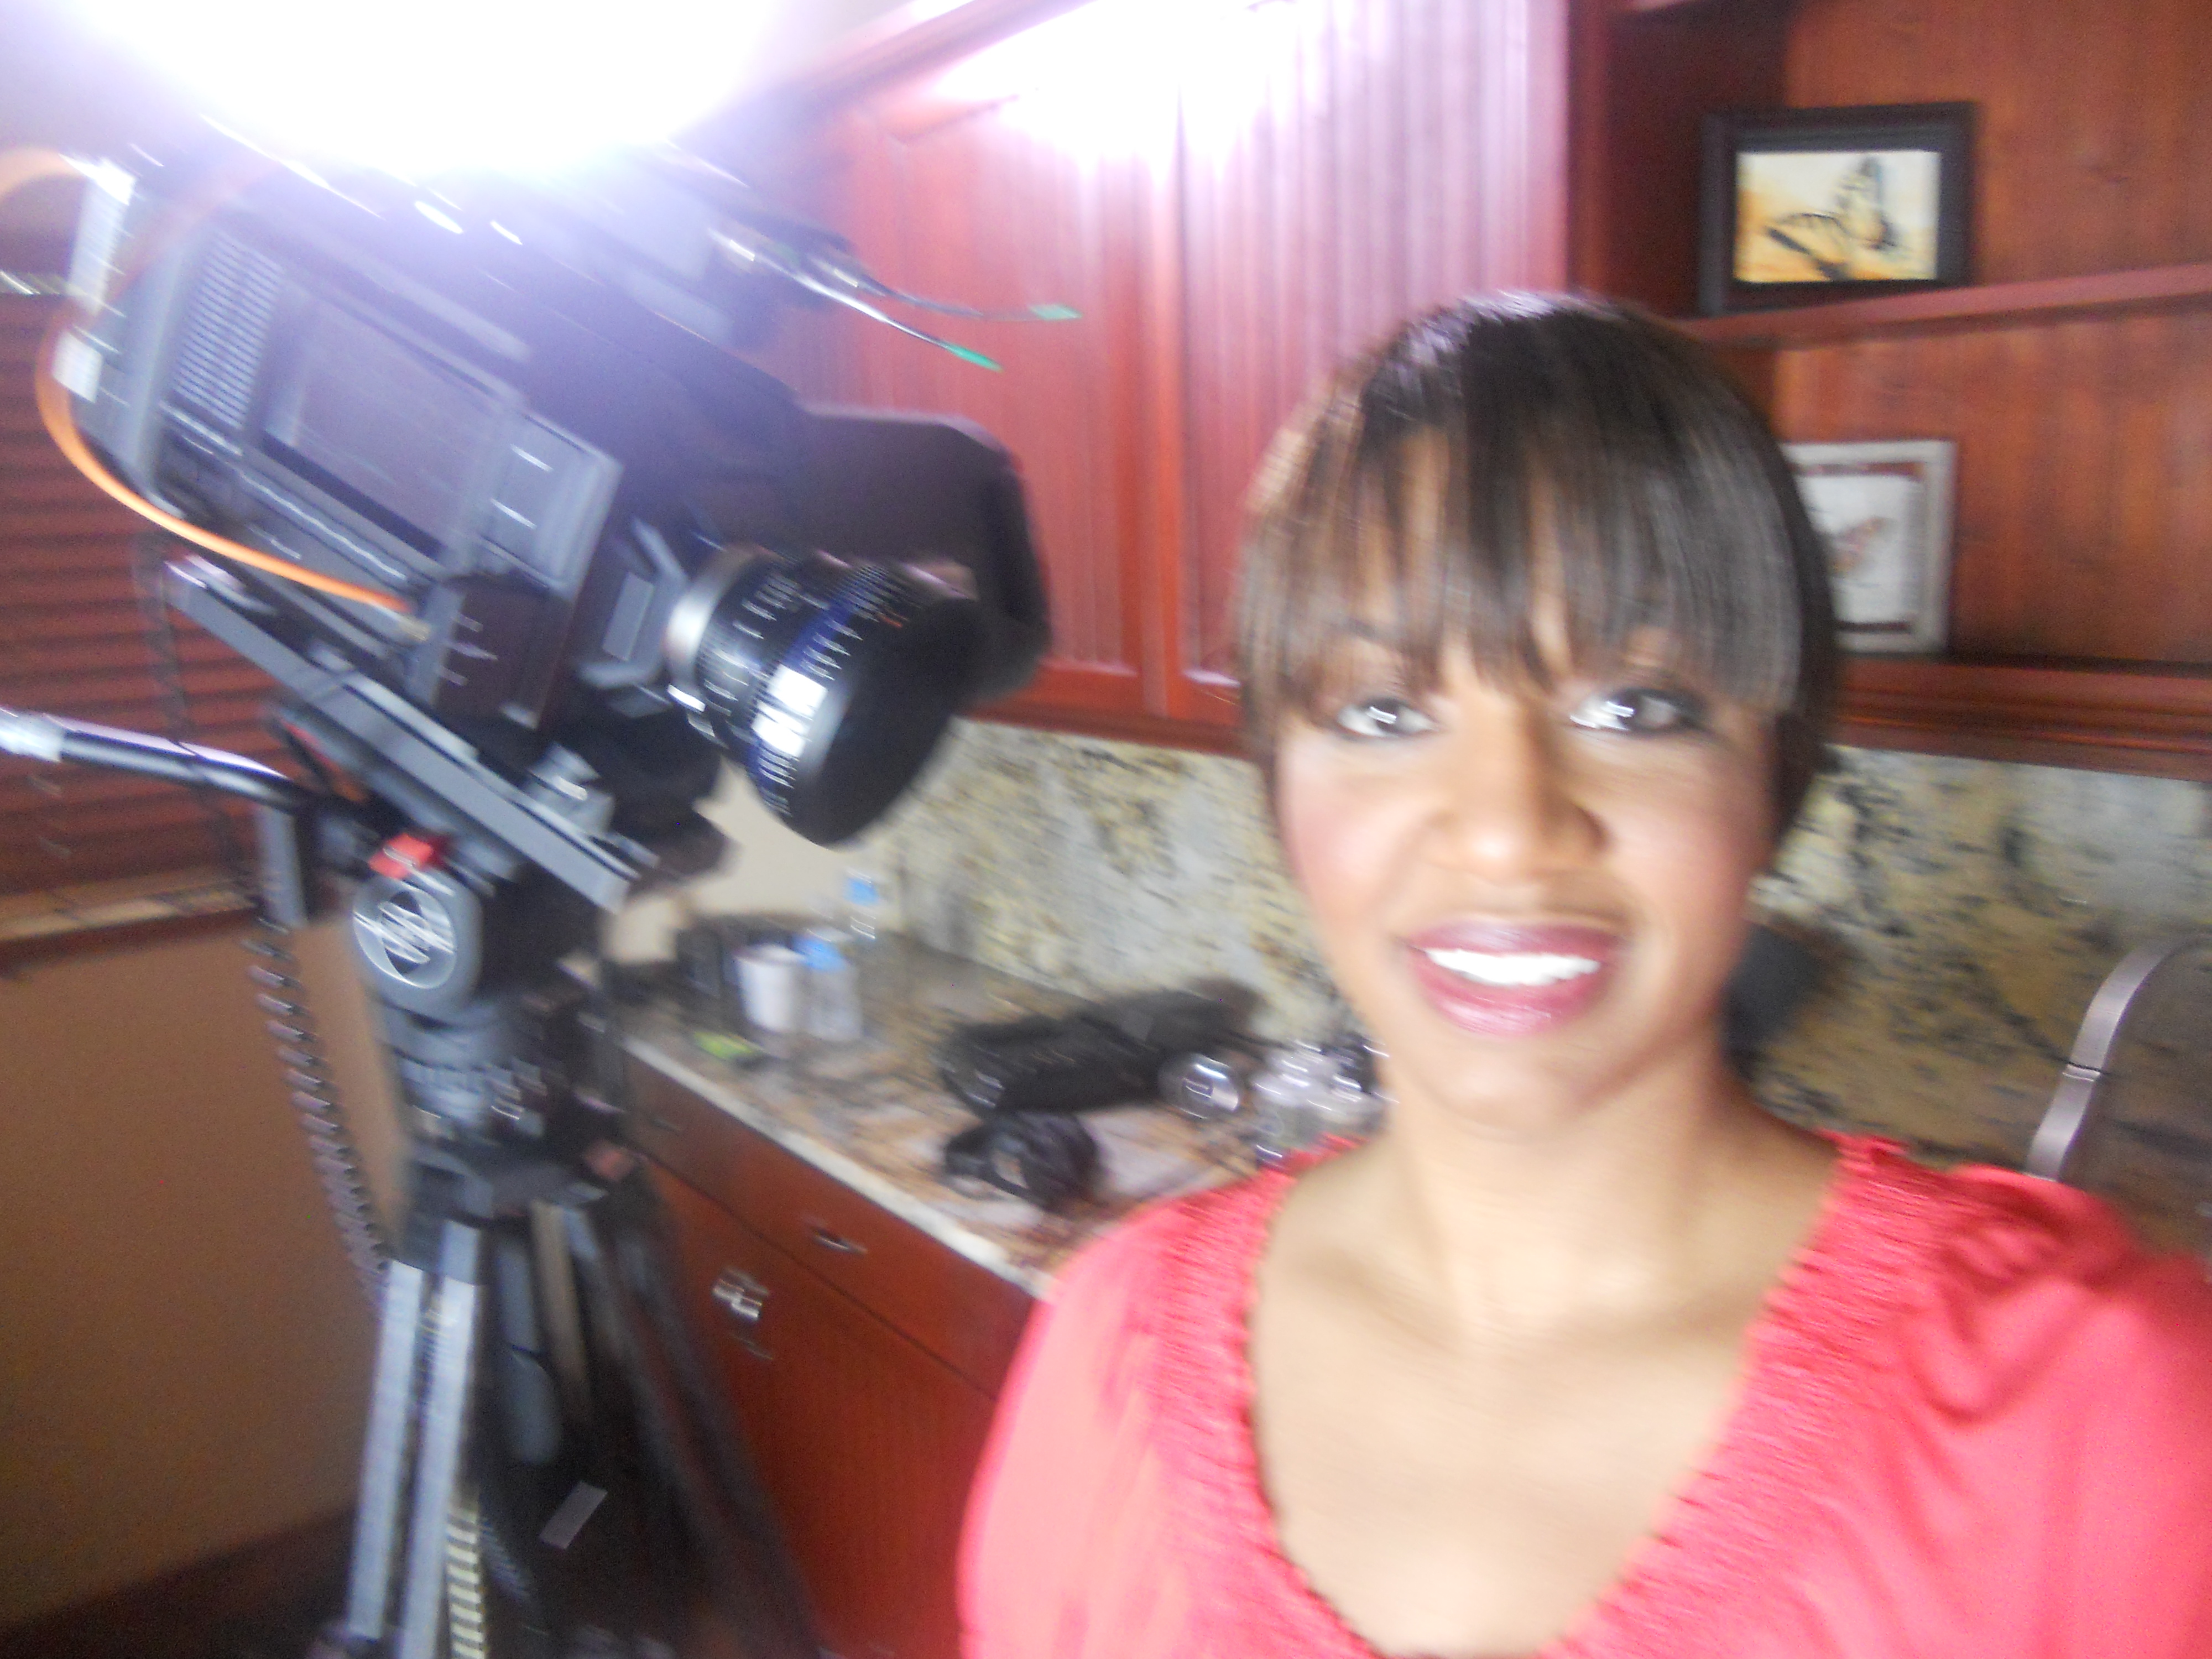 Nicole on set filming soeaking role in a PSA for HIV Awareness. The is currently airing on CBS-MY33 in Florida.